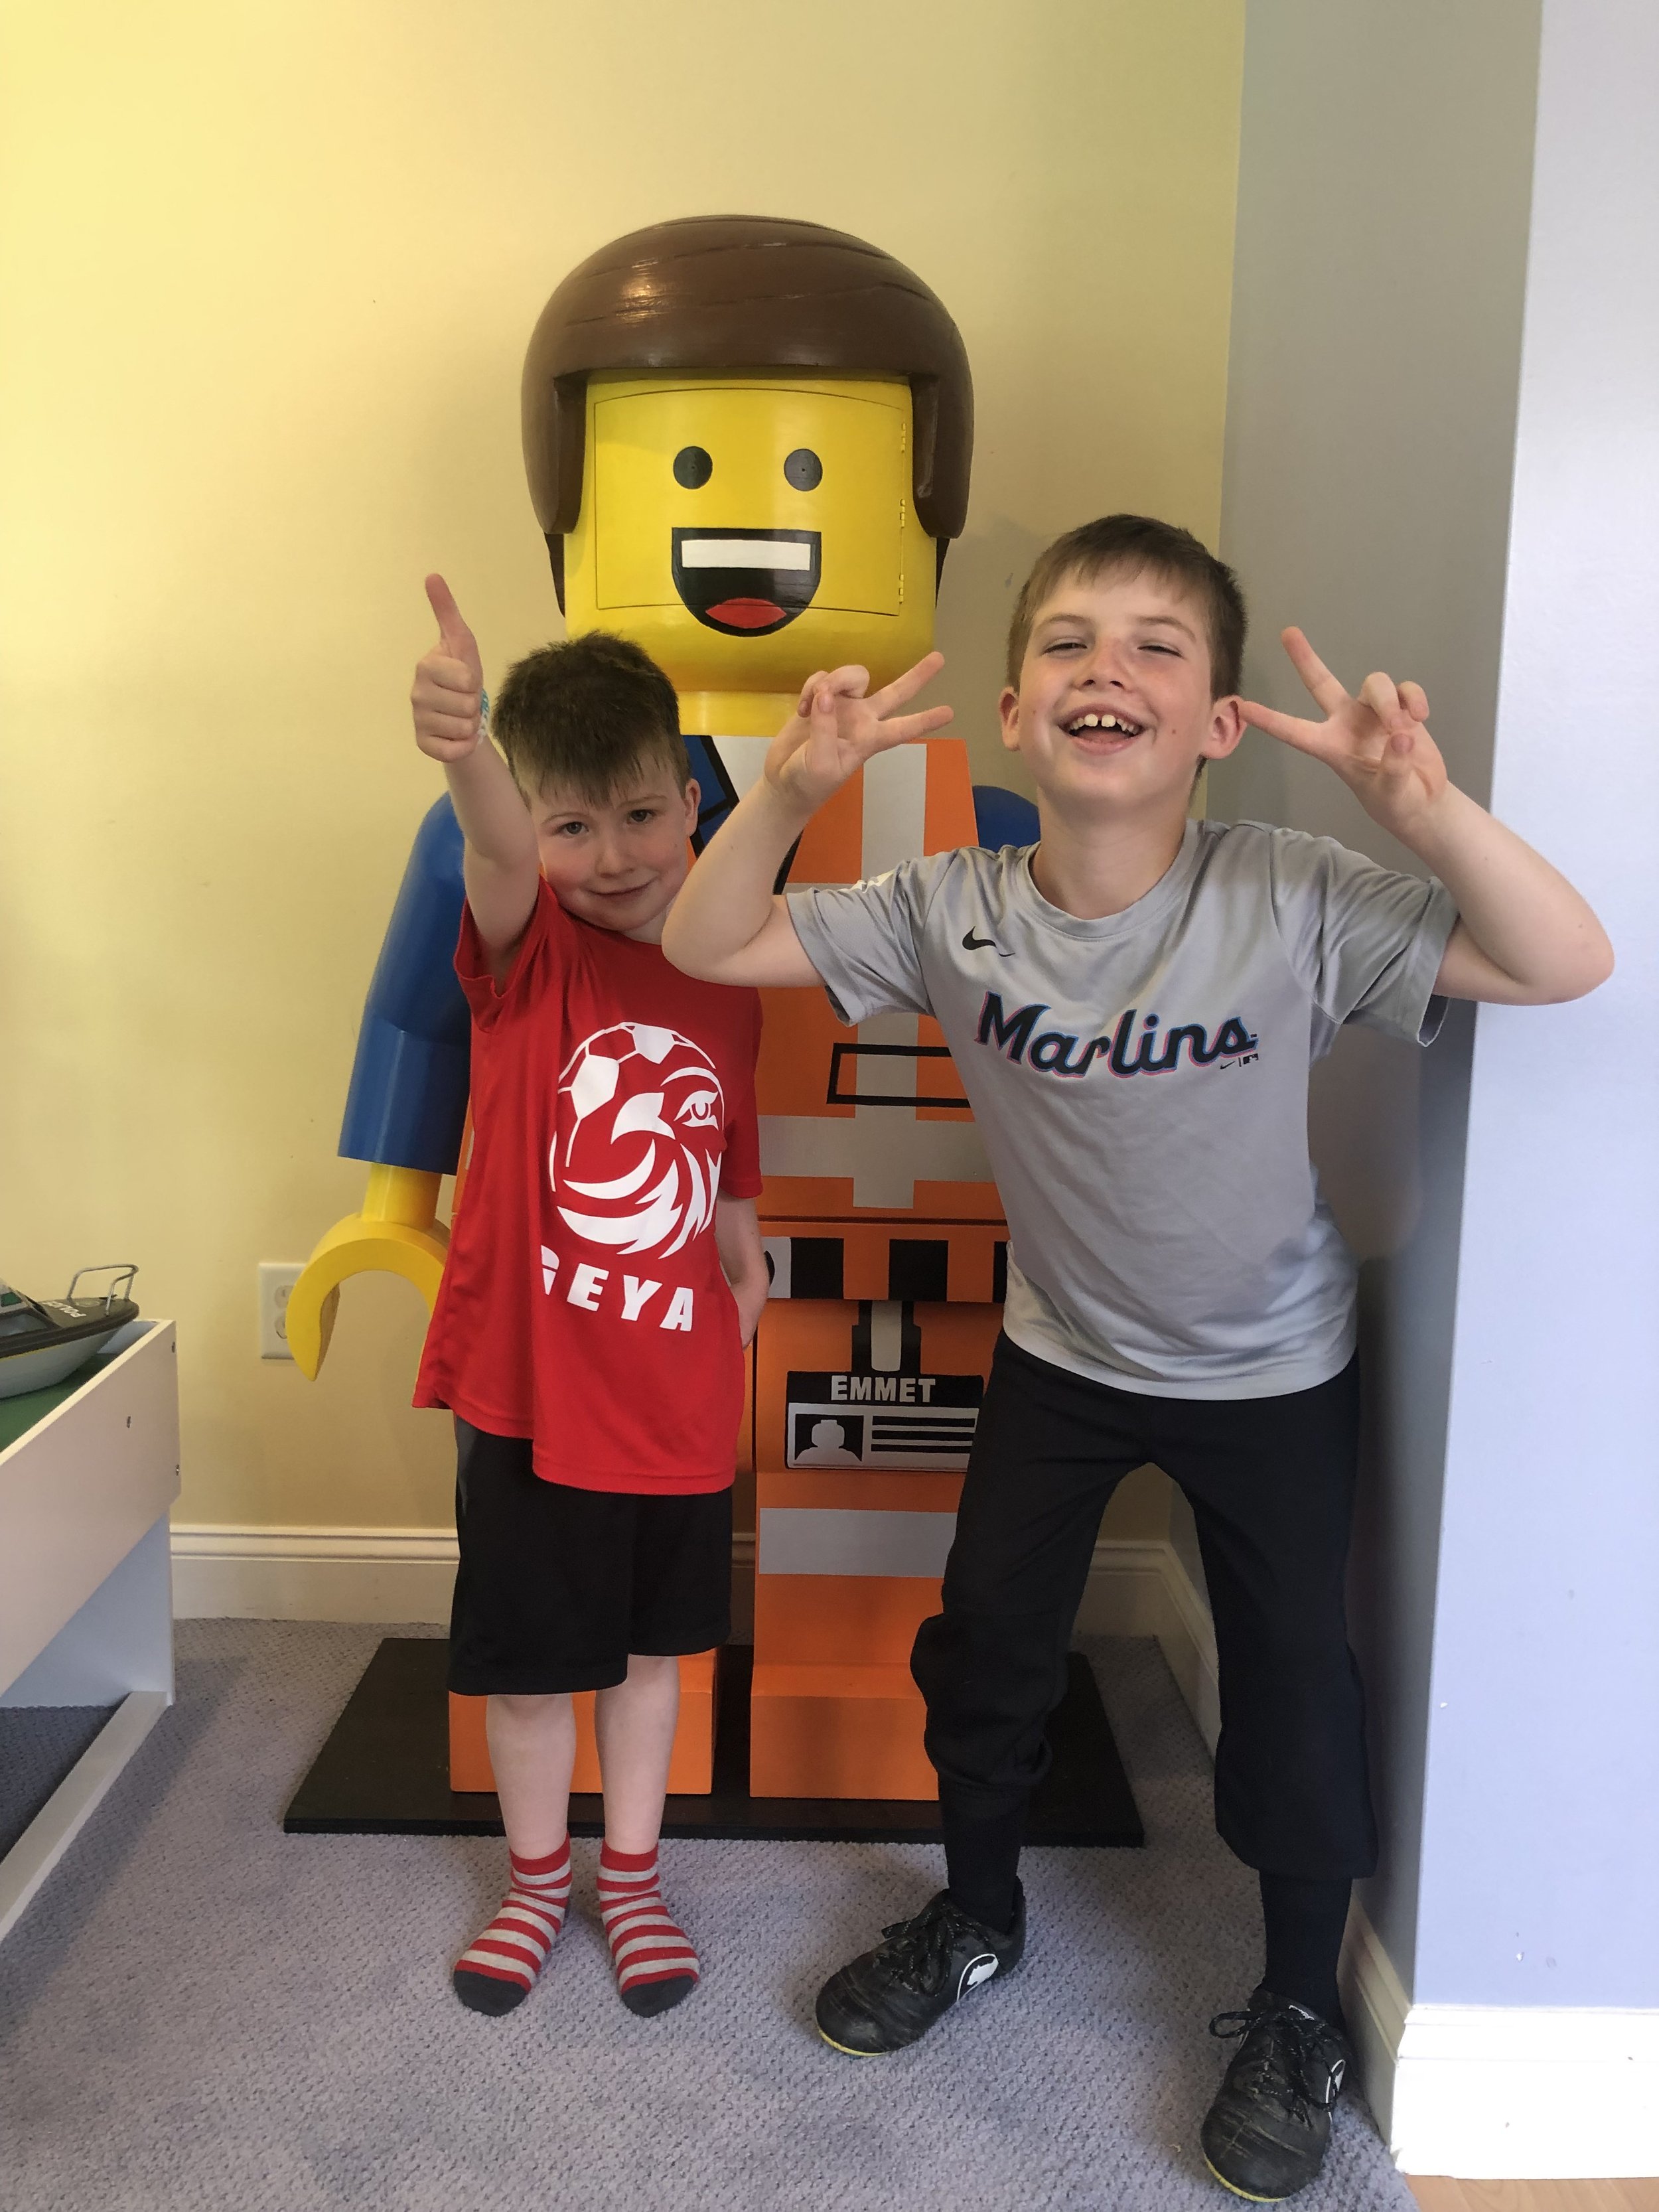  Emmet ended up raising a good amount of money for the school and at the end of the day one of the kids from my daughter’s kindergarten class was the winner. As you can see here, he and his older brother were very excited about it.  This was a super 